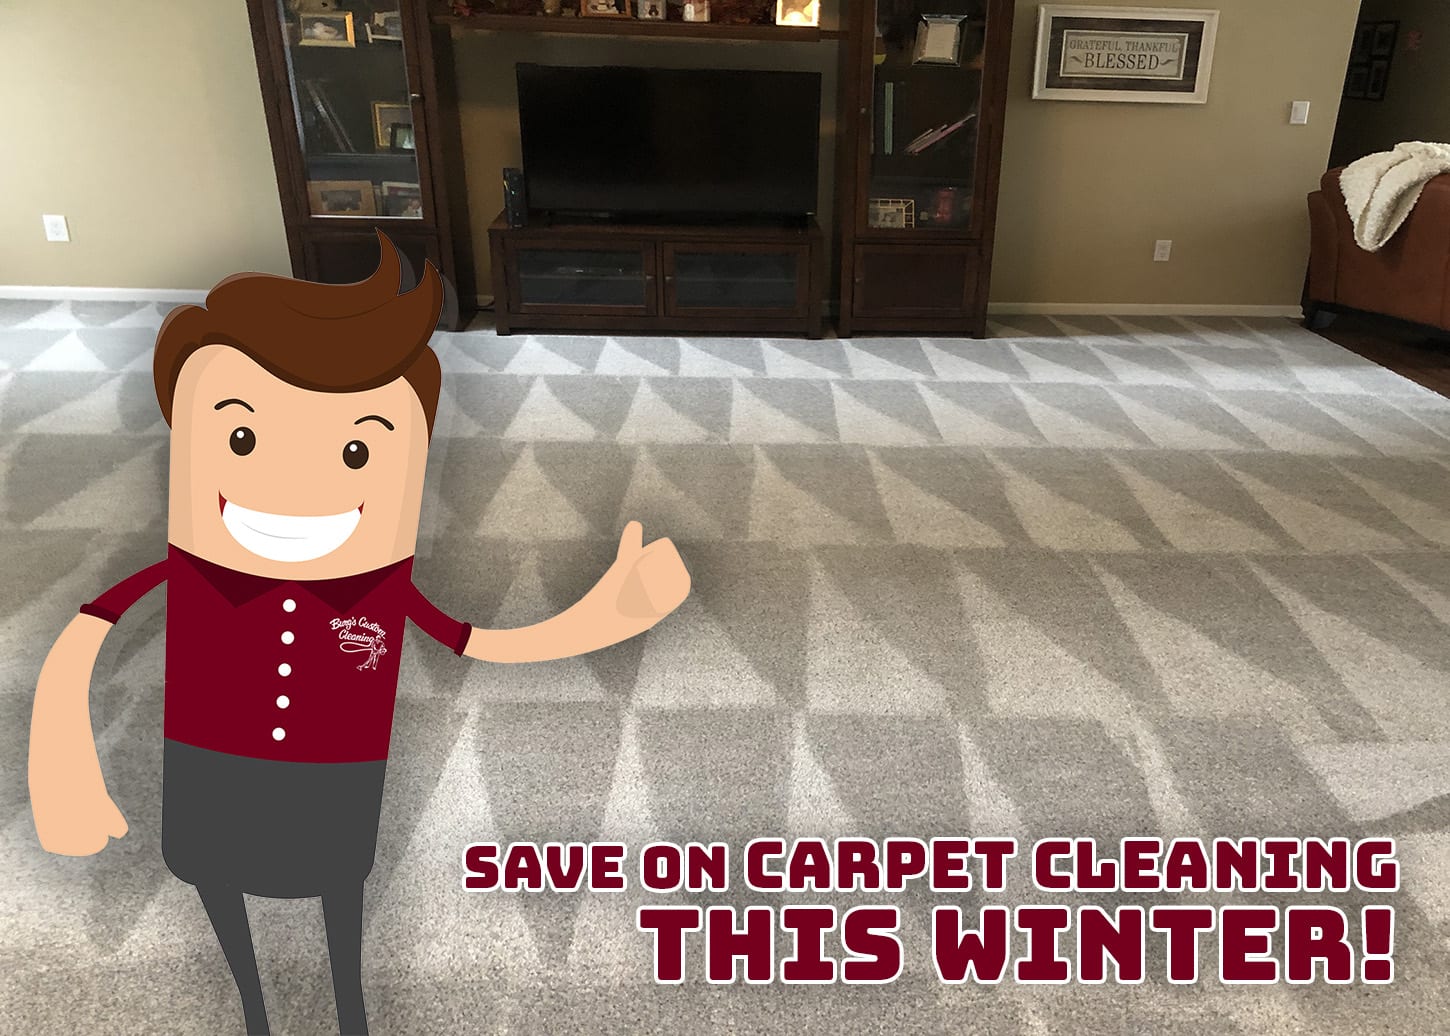 Save on Carpet Cleaning this Winter! Get up to 5 rooms and a hallway cleaned for $99! Limited time only!